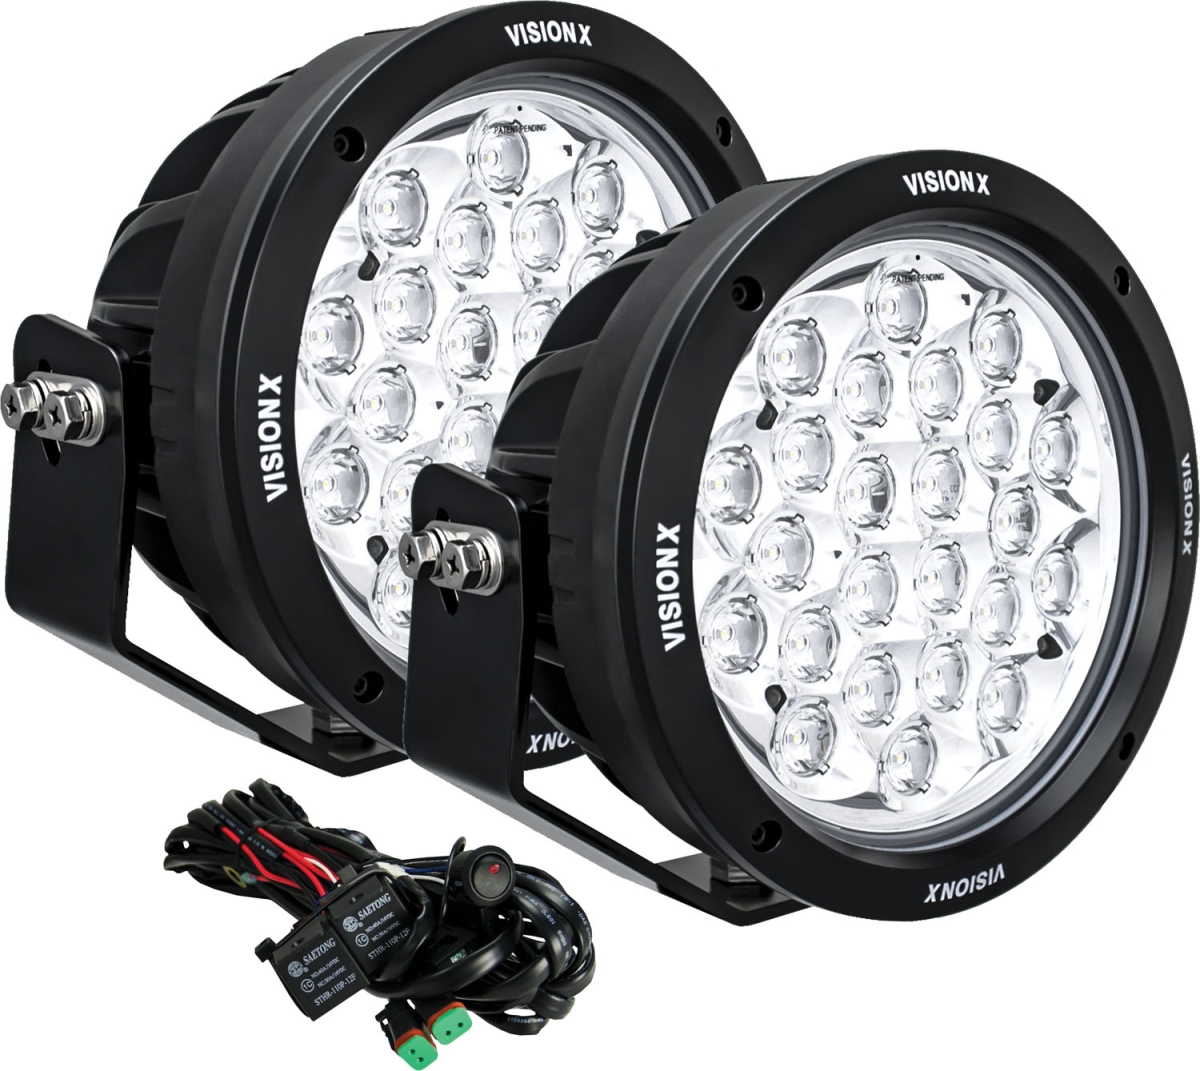 Picture of Vision X Lighting CG2-CPM2410KIT 8.7 in. 24 LED CG2 Light Cannon Including Harness Using DTP Connector - Pack of 2